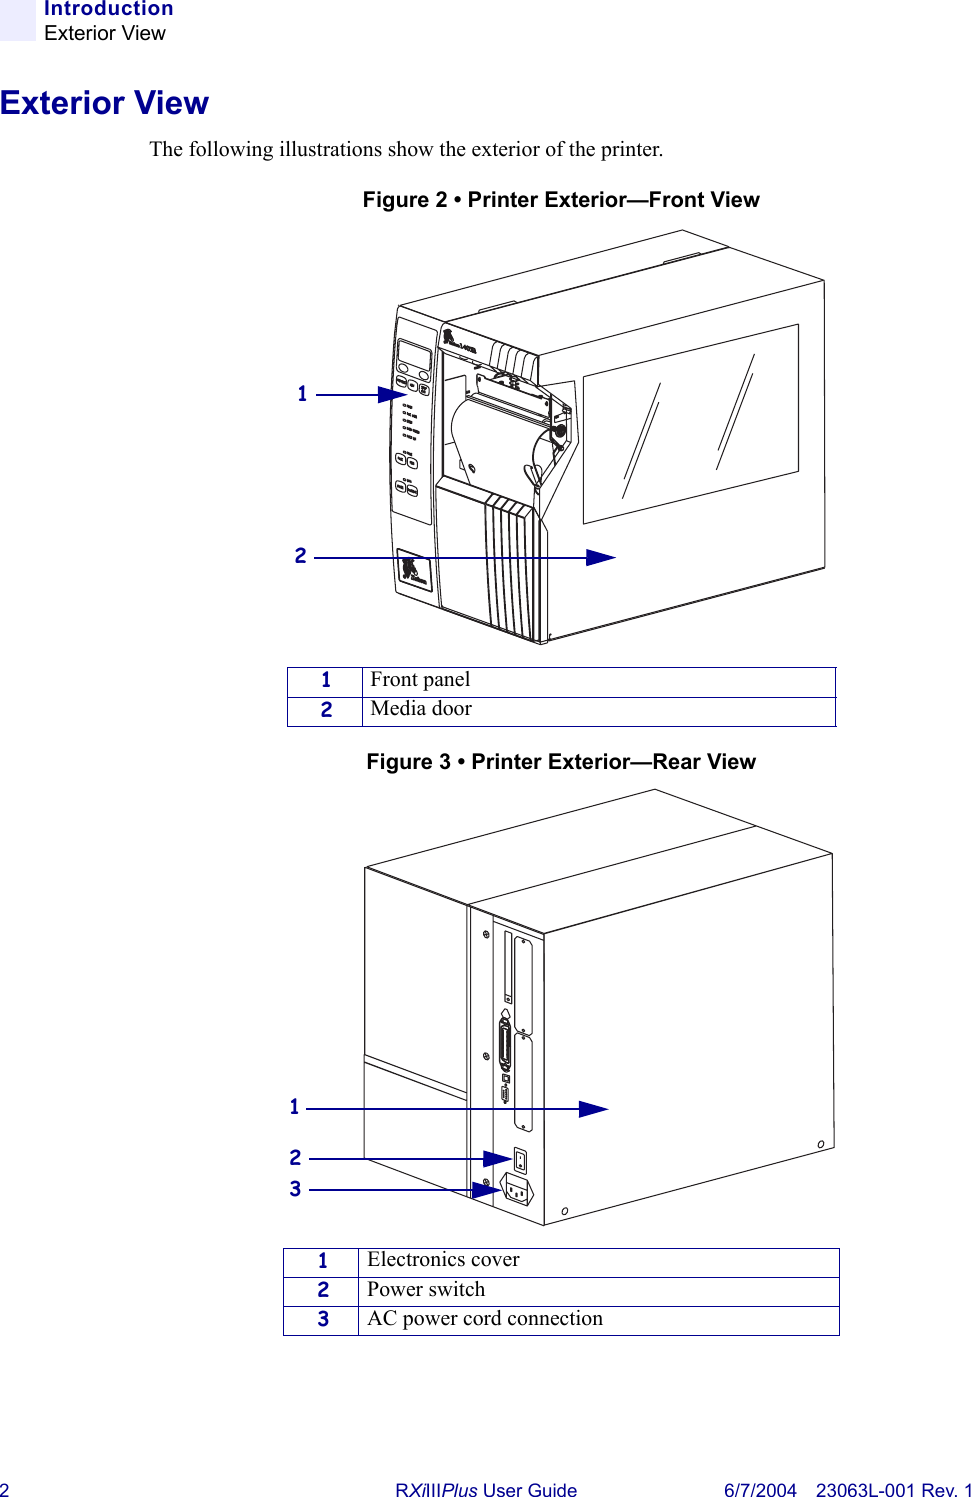 2RXiIIIPlus User Guide 6/7/2004 23063L-001 Rev. 1IntroductionExterior ViewExterior ViewThe following illustrations show the exterior of the printer.Figure 2 • Printer Exterior—Front ViewFigure 3 • Printer Exterior—Rear View1Front panel2Media door1Electronics cover2Power switch3AC power cord connection12213